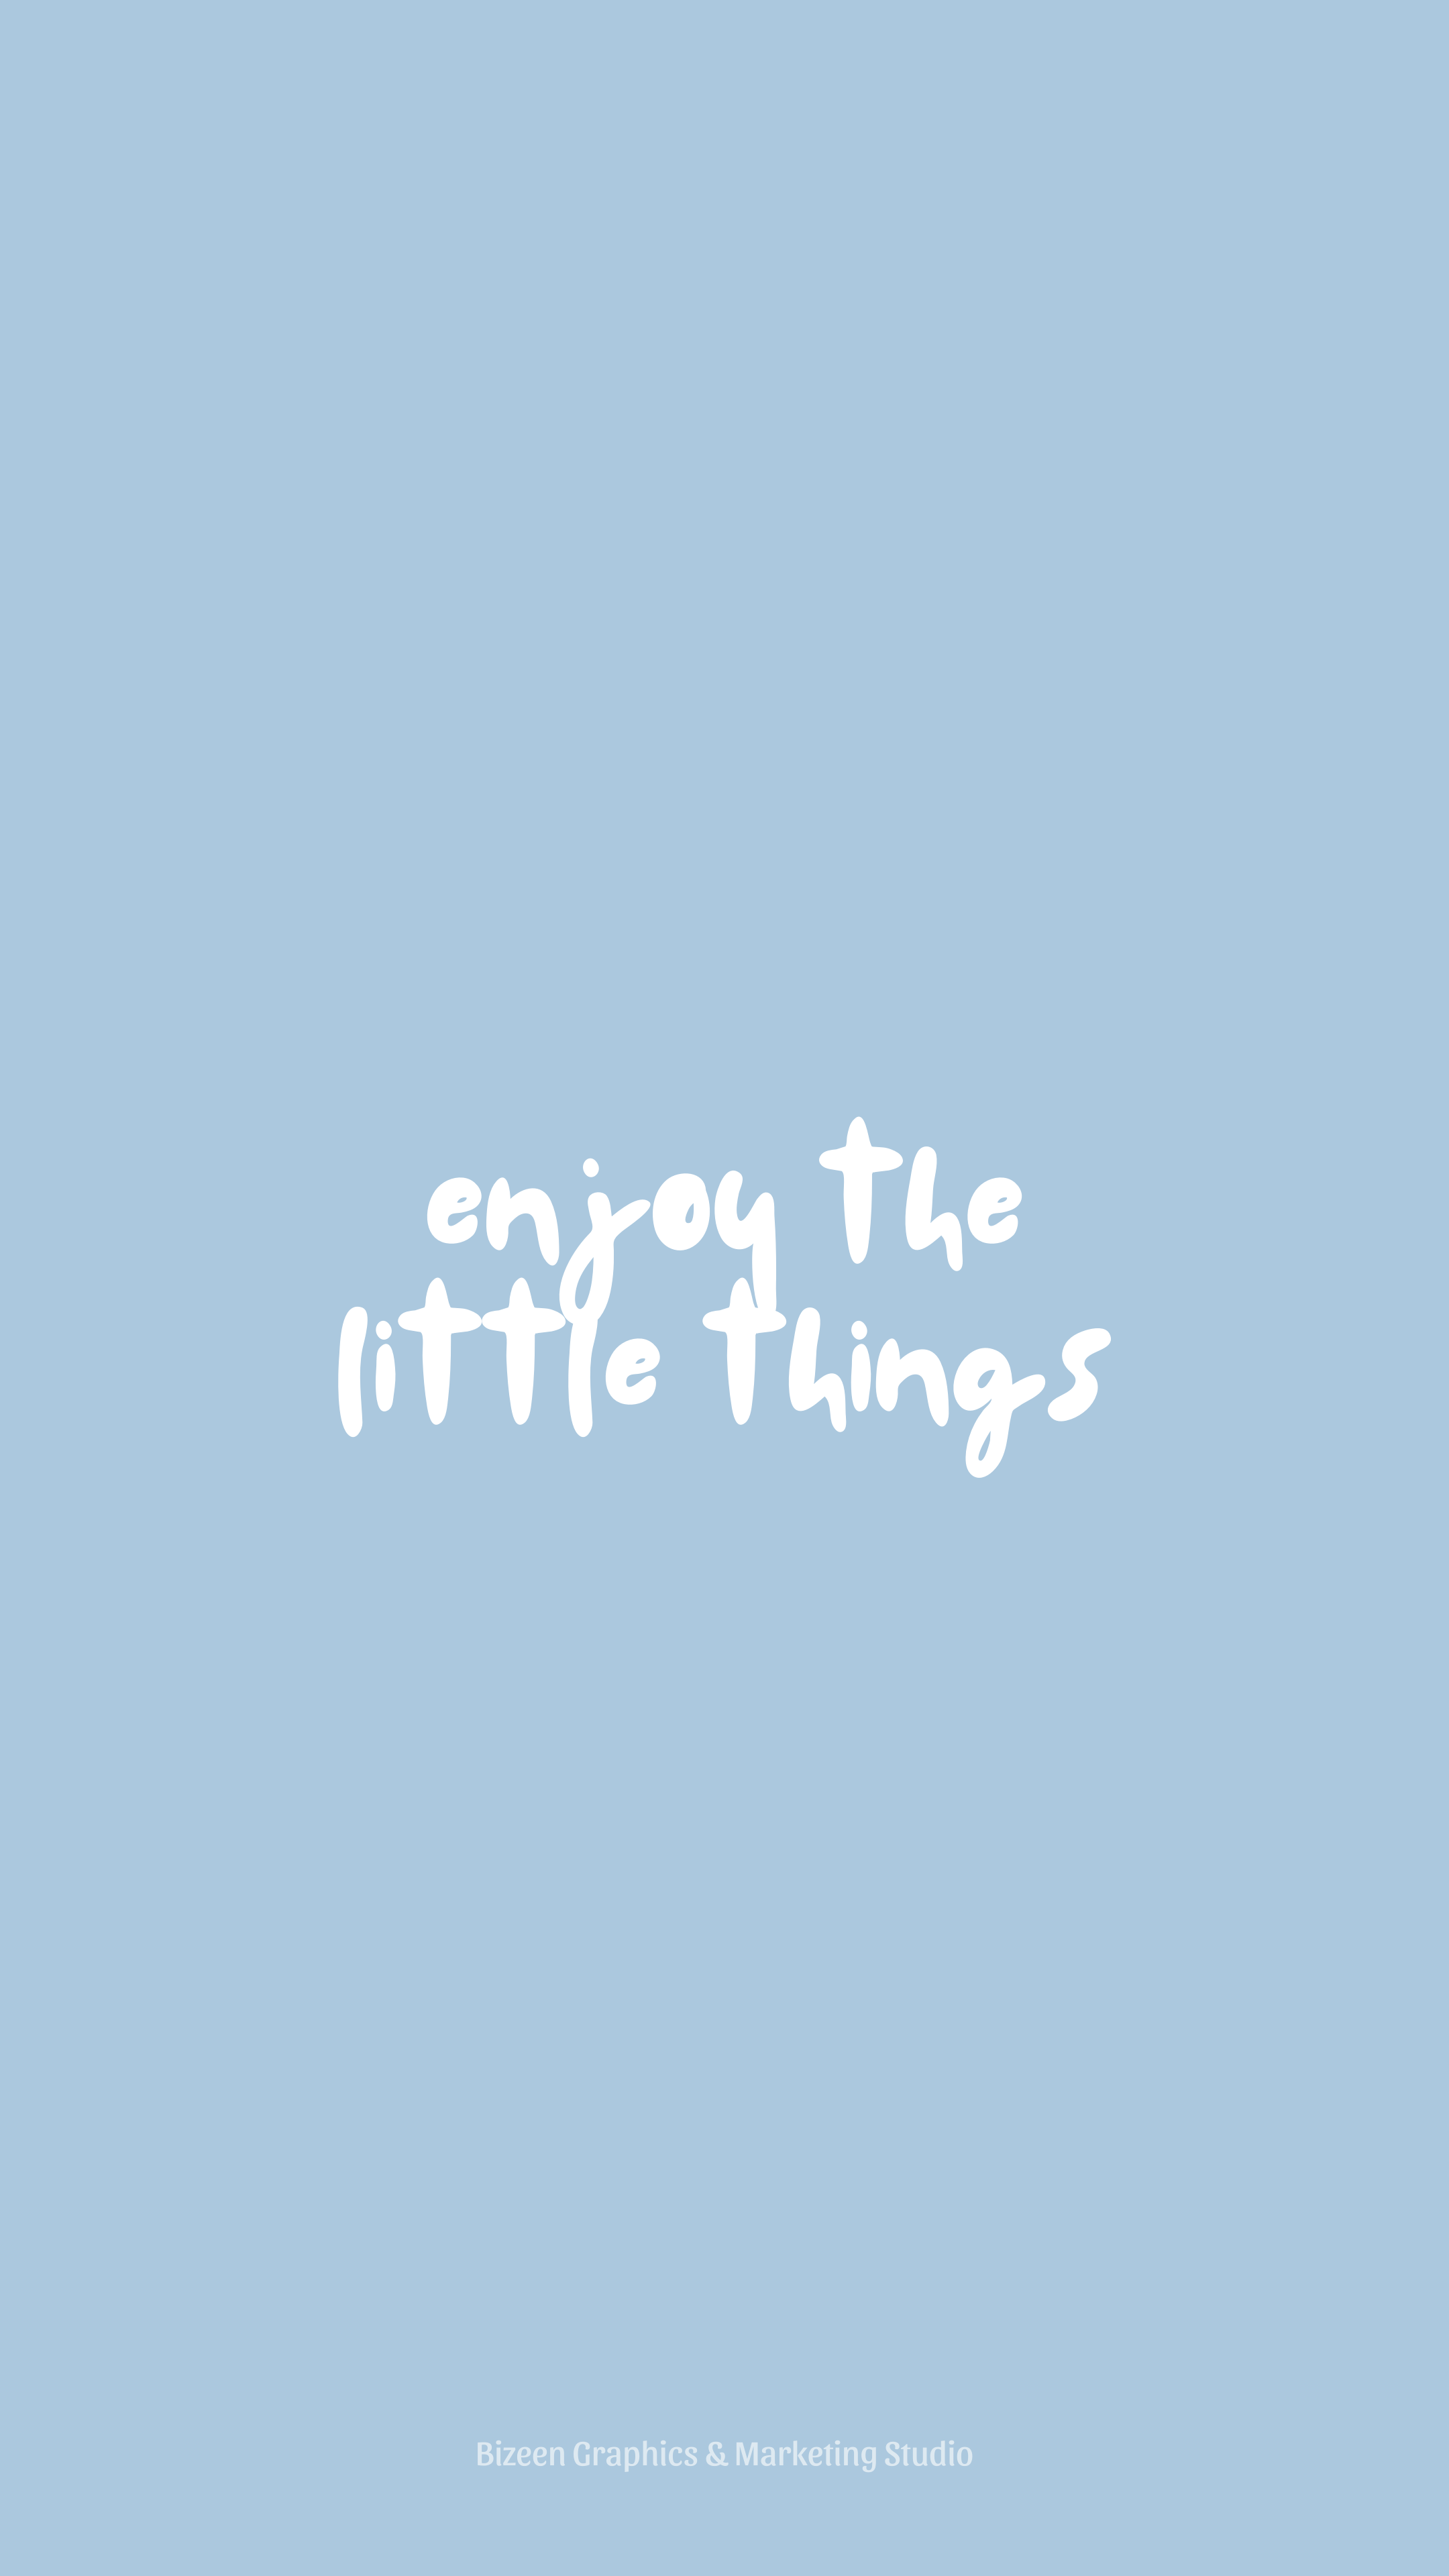 Enjoy the little things - Quotes